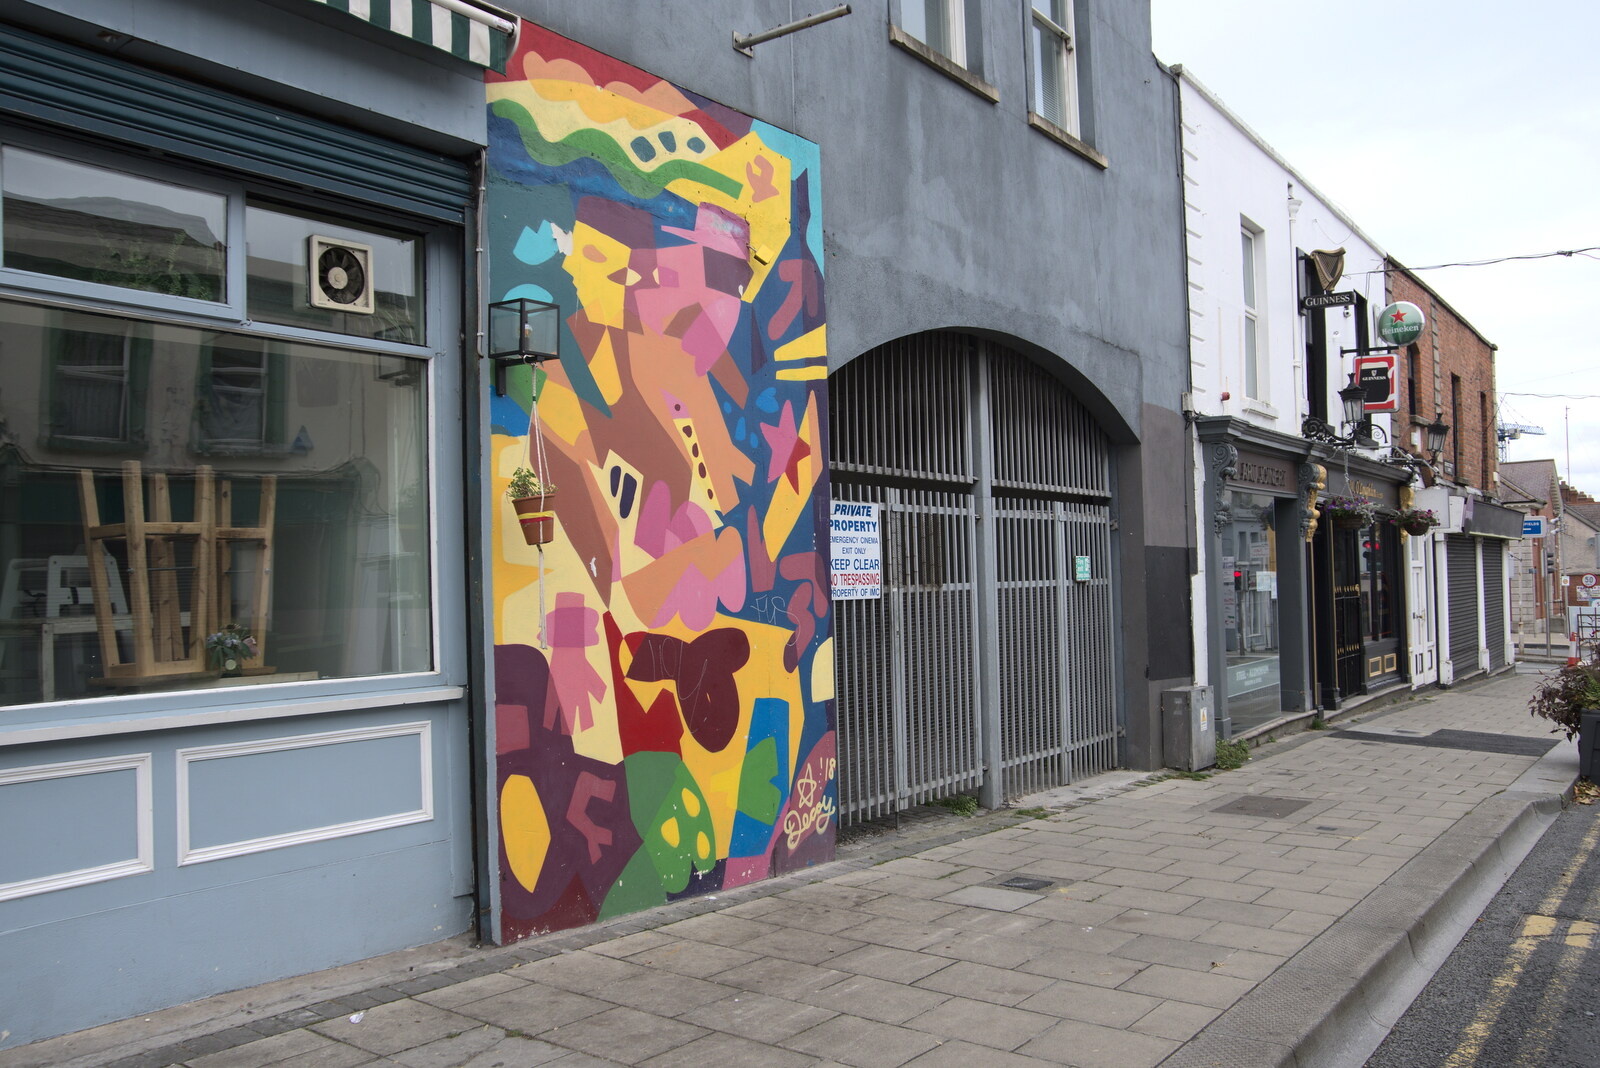 More wall art on George's Street from Manorhamilton and the Street Art of Dún Laoghaire, Ireland - 15th August 2021